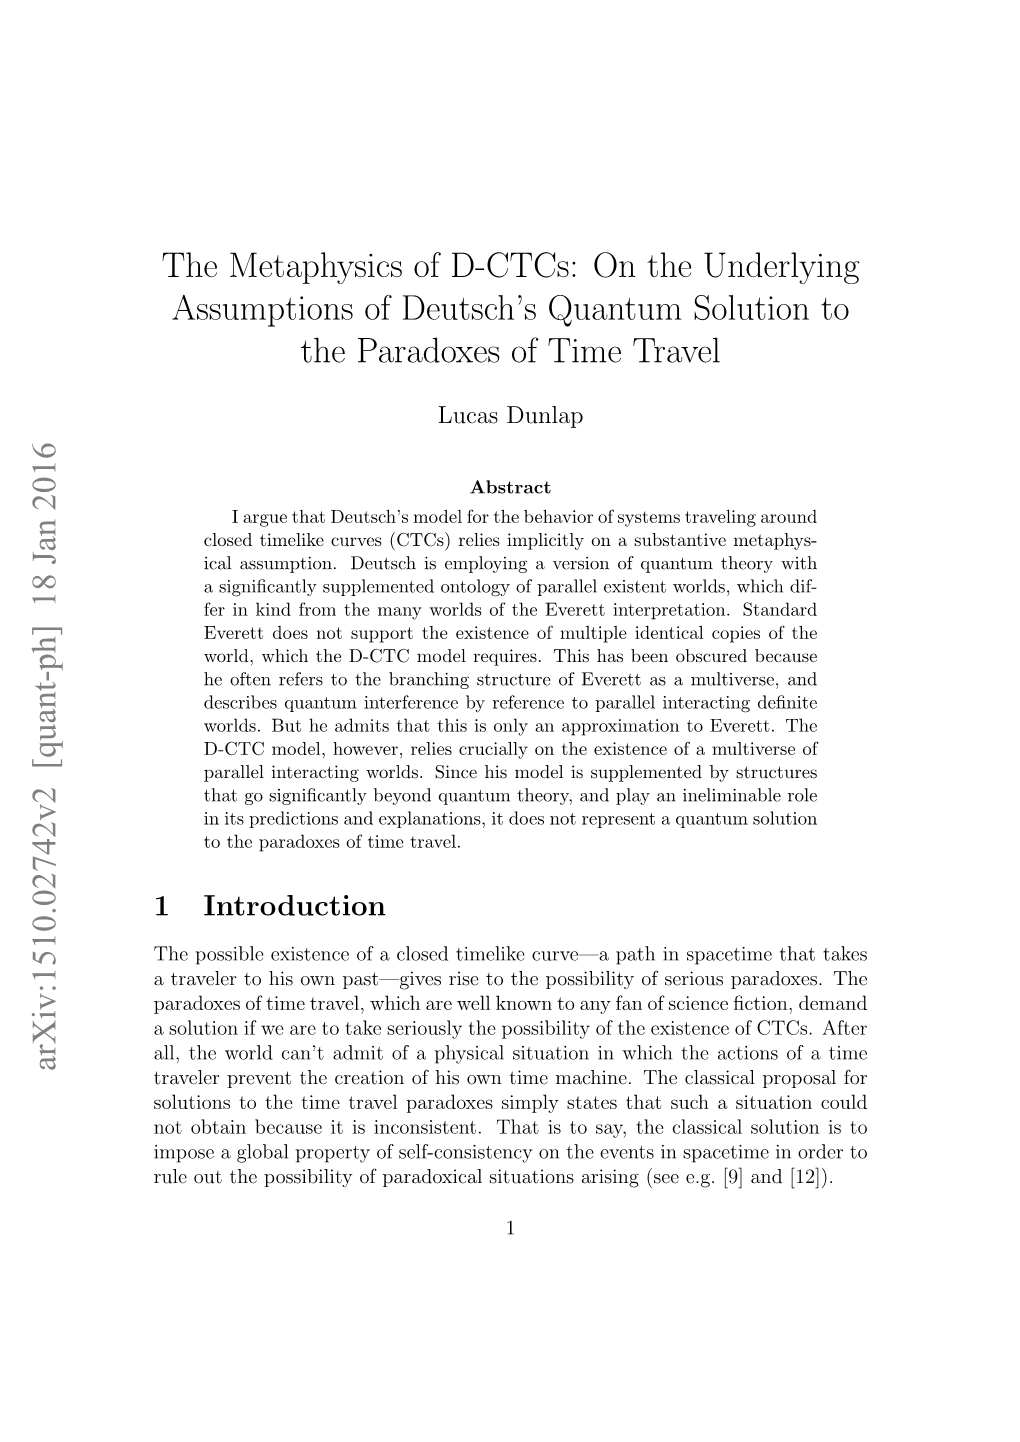 The Metaphysics of D-Ctcs: on the Underlying Assumptions of Deutsch's Quantum Solution to the Paradoxes of Time Travel Arxiv:1